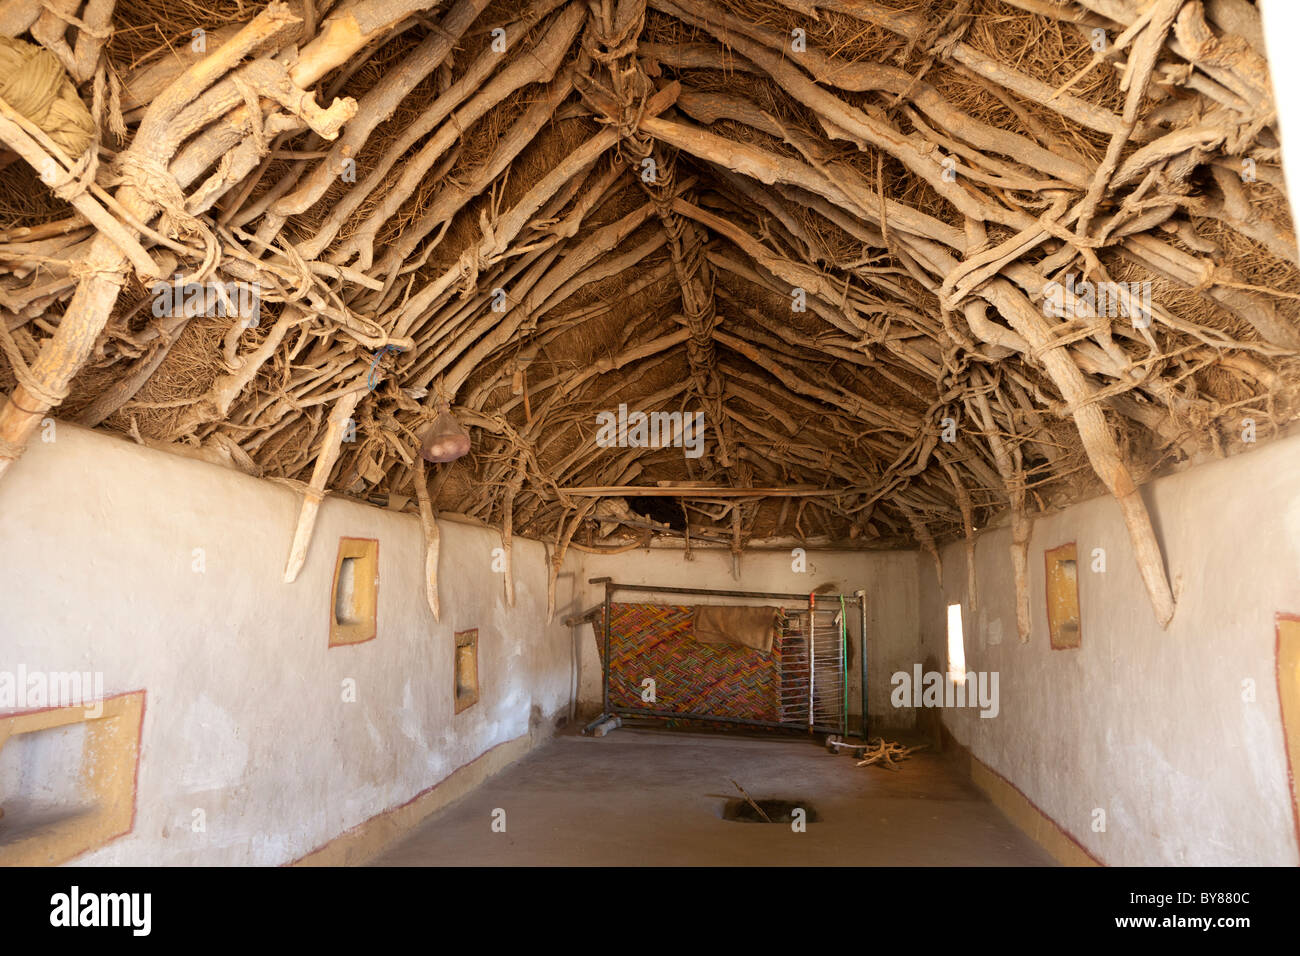 India, Rajasthan, Thar Desert, interior of traditonal home showing method of roof construction Stock Photo